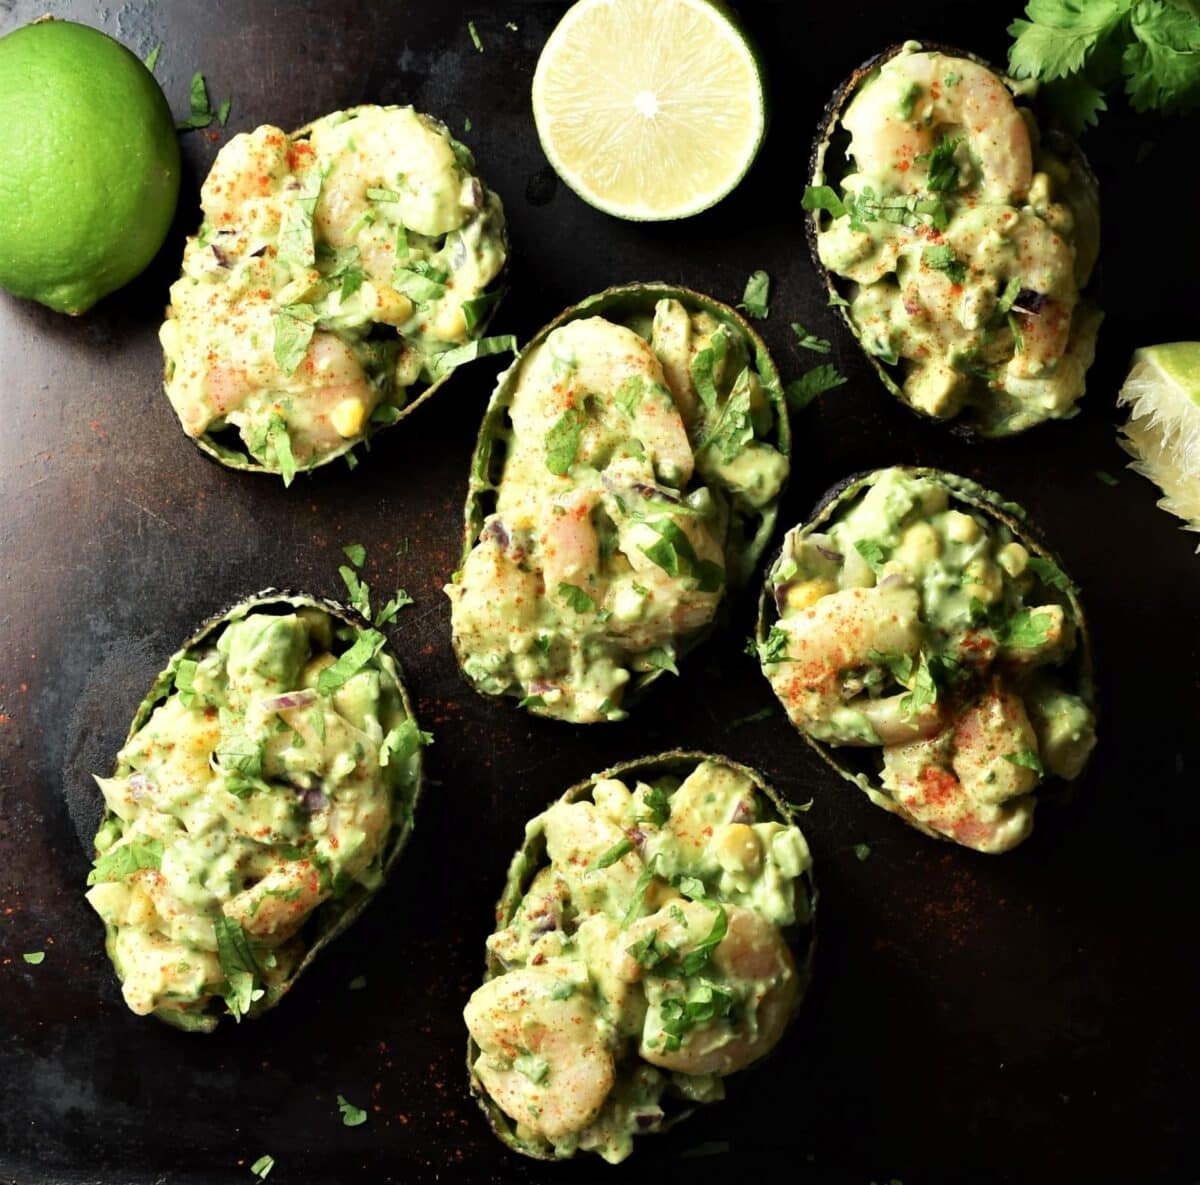 Top down view of stuffed avocado halves with limes in background.